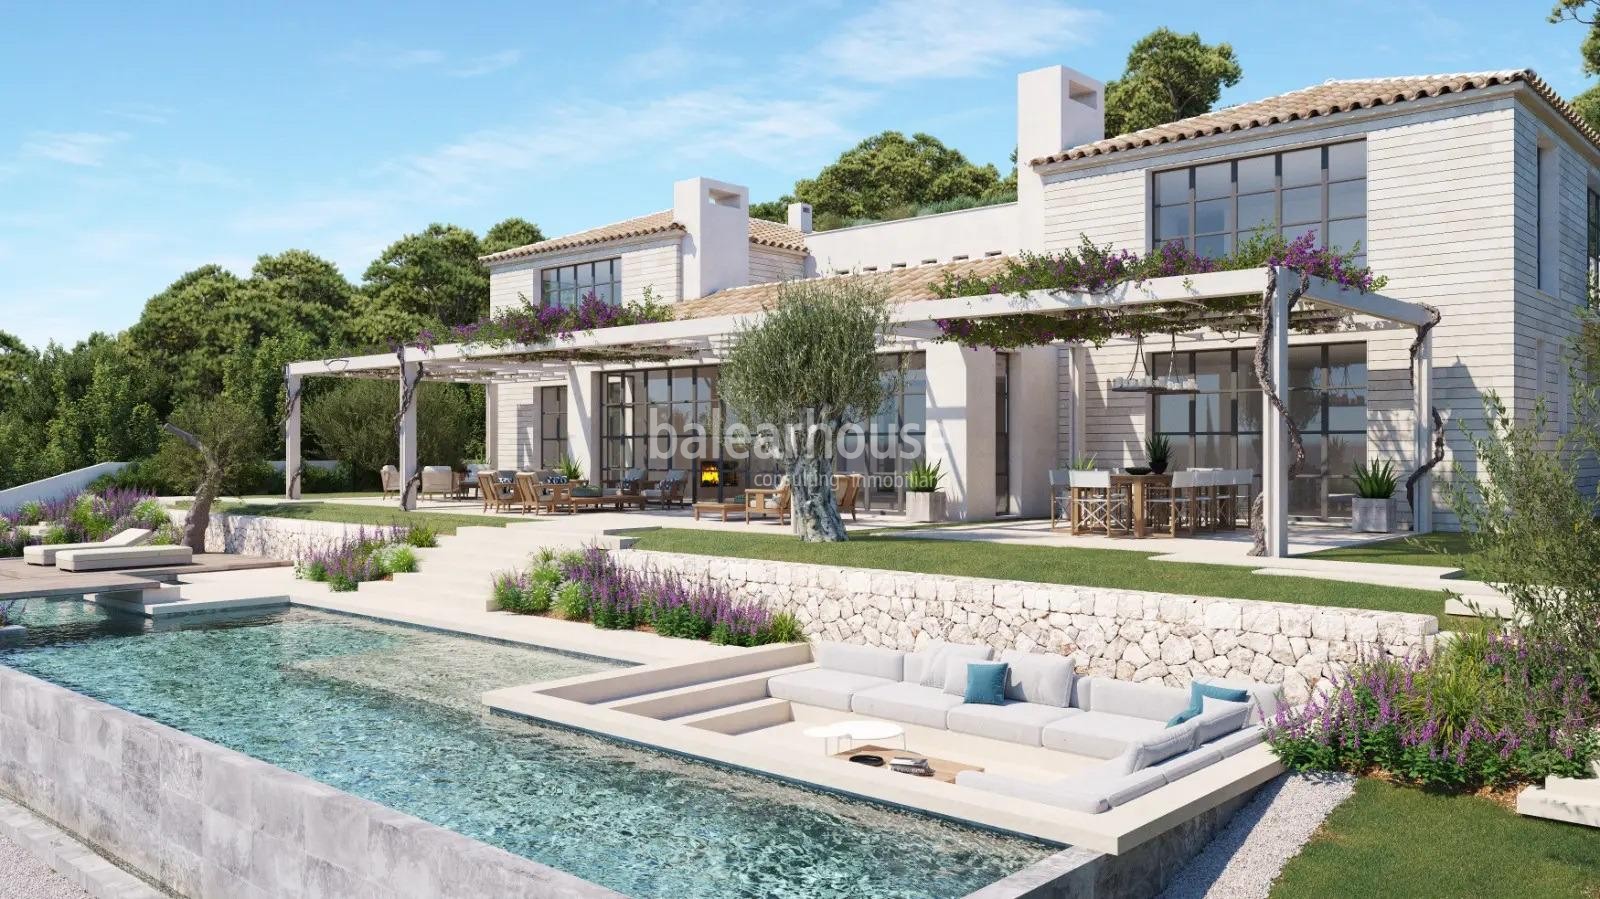 Large newly built villa with an elegant contemporary design and stunning sea views.